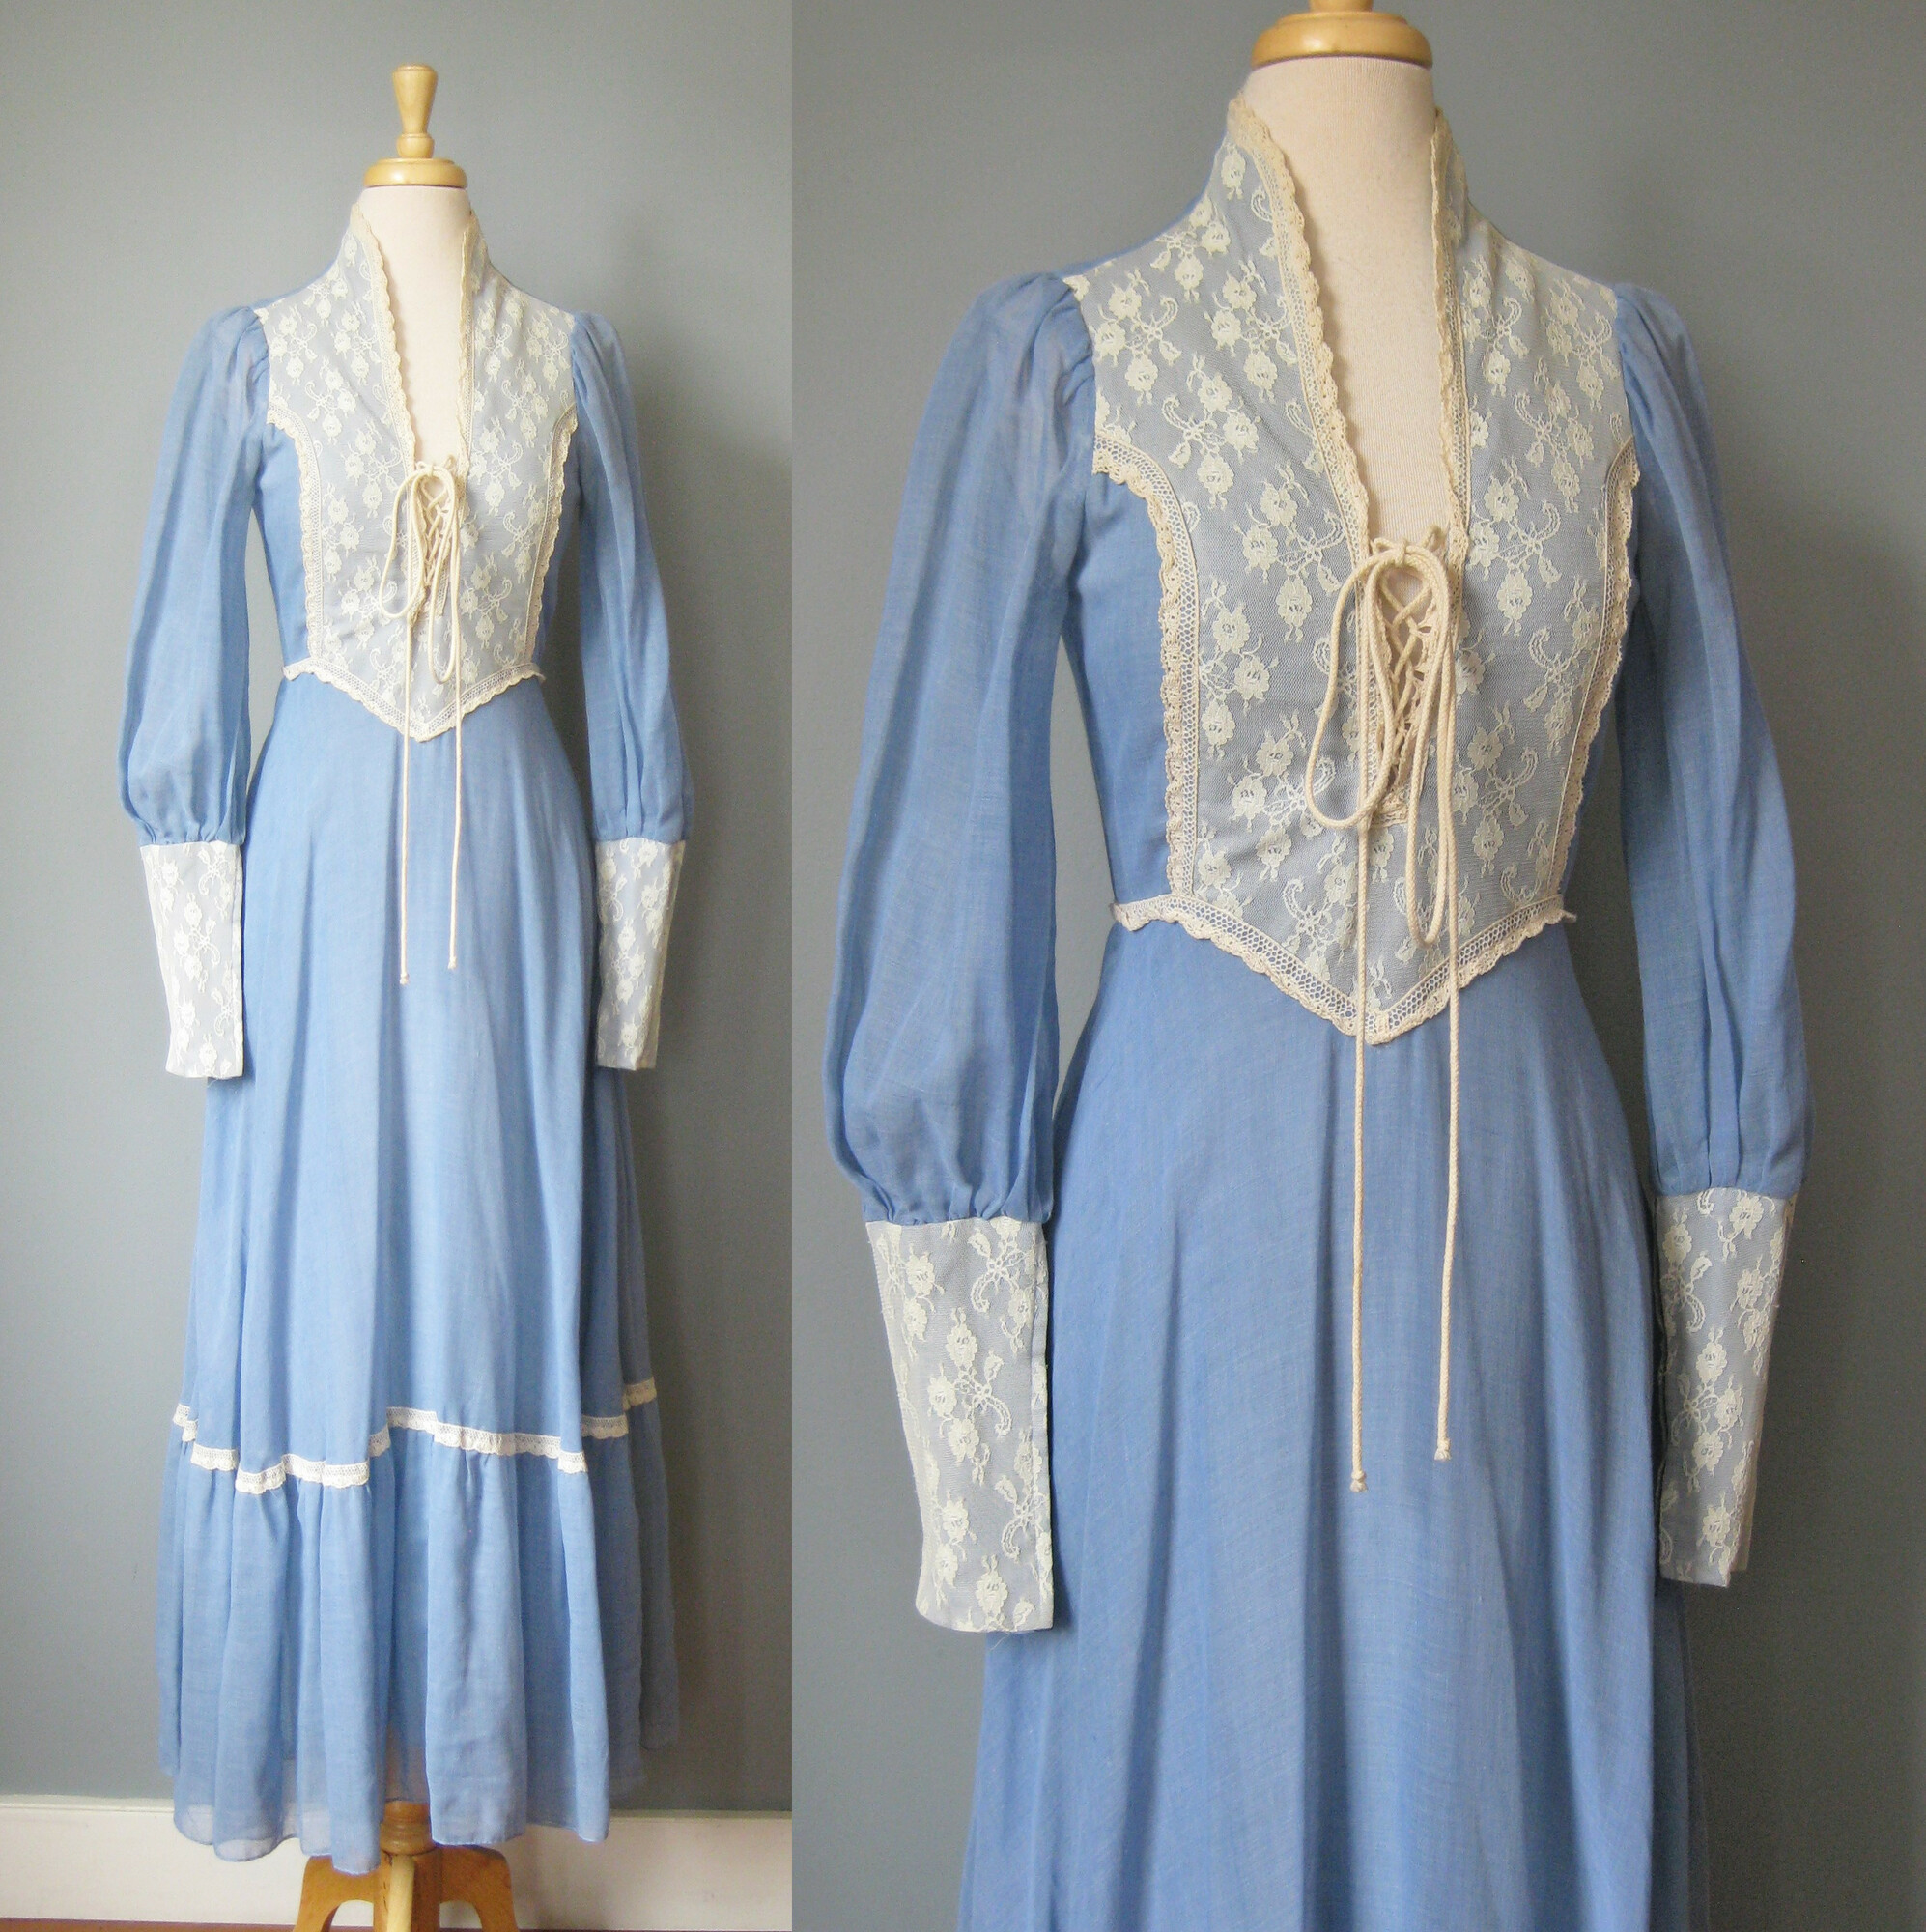 Vintage 1970s Gunne Sax Gown in blue cotton with white/offwhite lace trim.
corset lace front
Low neckline and sweeps up to cover the back of the neck
Gathered skirt is quite full
Juliet type sleeves, blue cotton from the shoulder to the forearm and then tight lace from there to the wrist.  The sleeves have zippers so you can get that tight look but still get in and out of the dress easily.
It's fully lined in white/offwhite soft acetate


Almost like new condition.  I found one small hole in the lining as shown and the corset lacing has a brown area also shown.

Here are the flat measurements please double where appropriate
Shoulder to shoulder: 13
Amrpit to Armpit: 17
Waist: 13
Hips: 20
Length: 57

Thank you for looking.
#43206